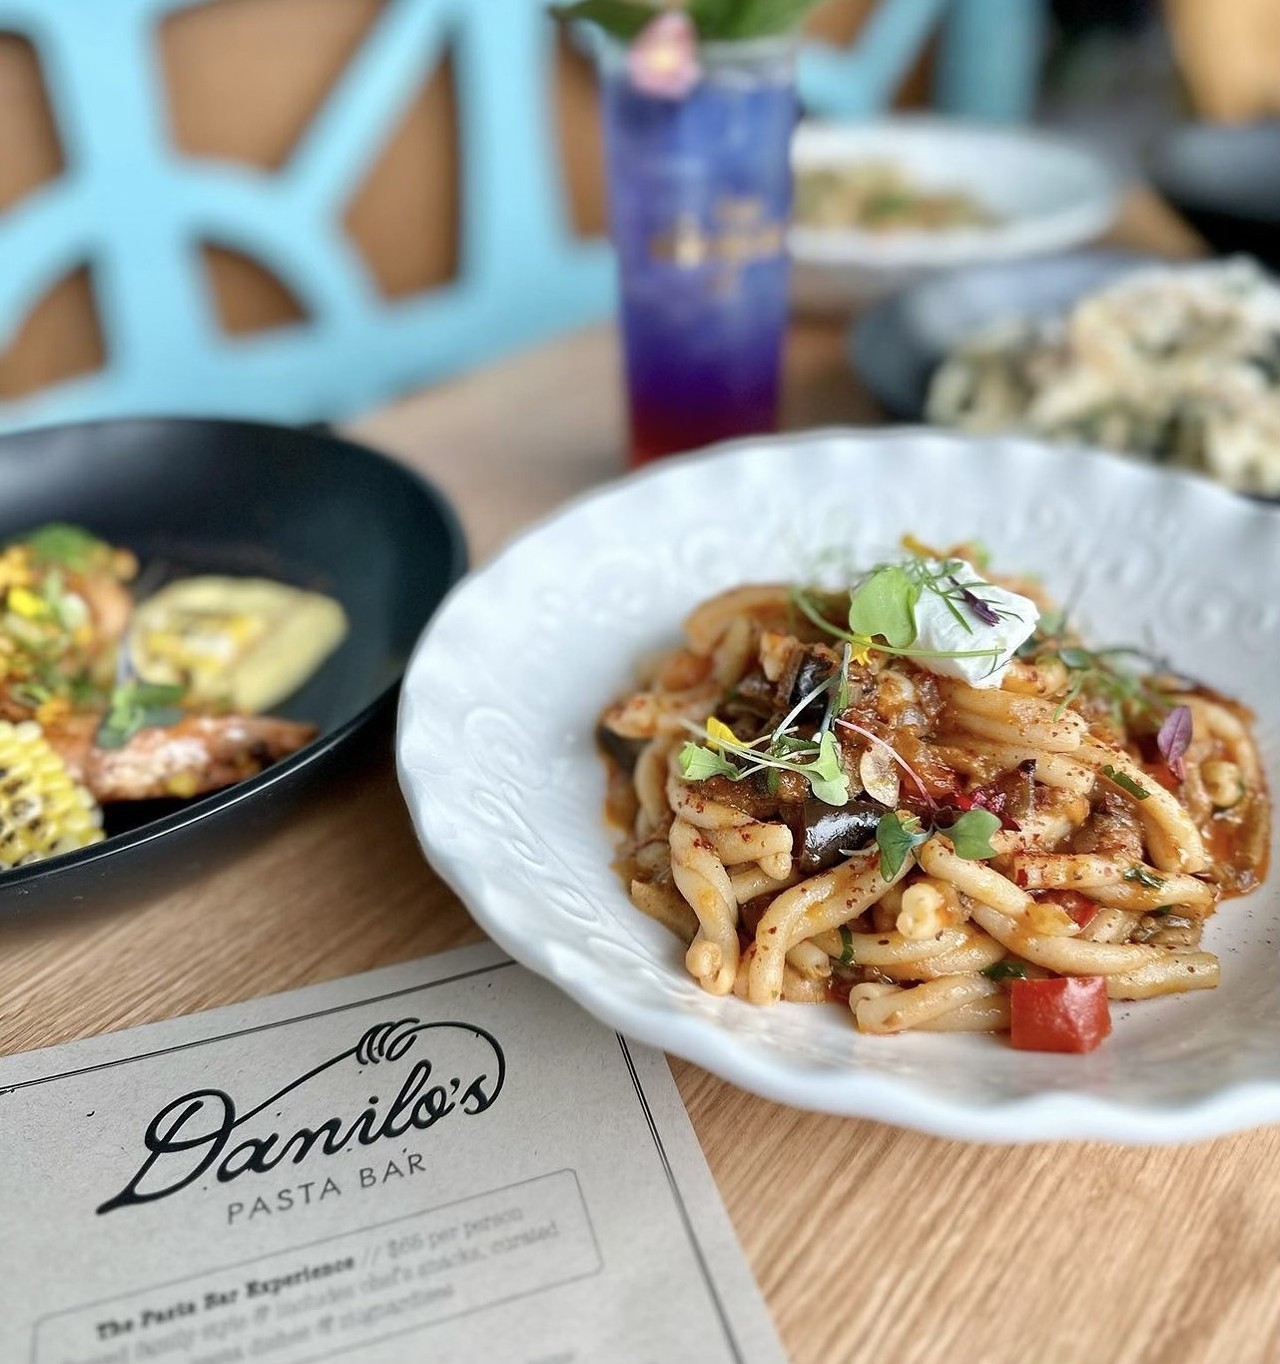 Danilo’s Pasta & Noodle bar
3201 Corrine Drive, Orlando
Expect a range of classic hand-made pasta dishes at Danilo’s Pasta & Noodle bar. The noodle creations are influenced by both classic Italian cuisine and the vibrant street food culture of Asia.